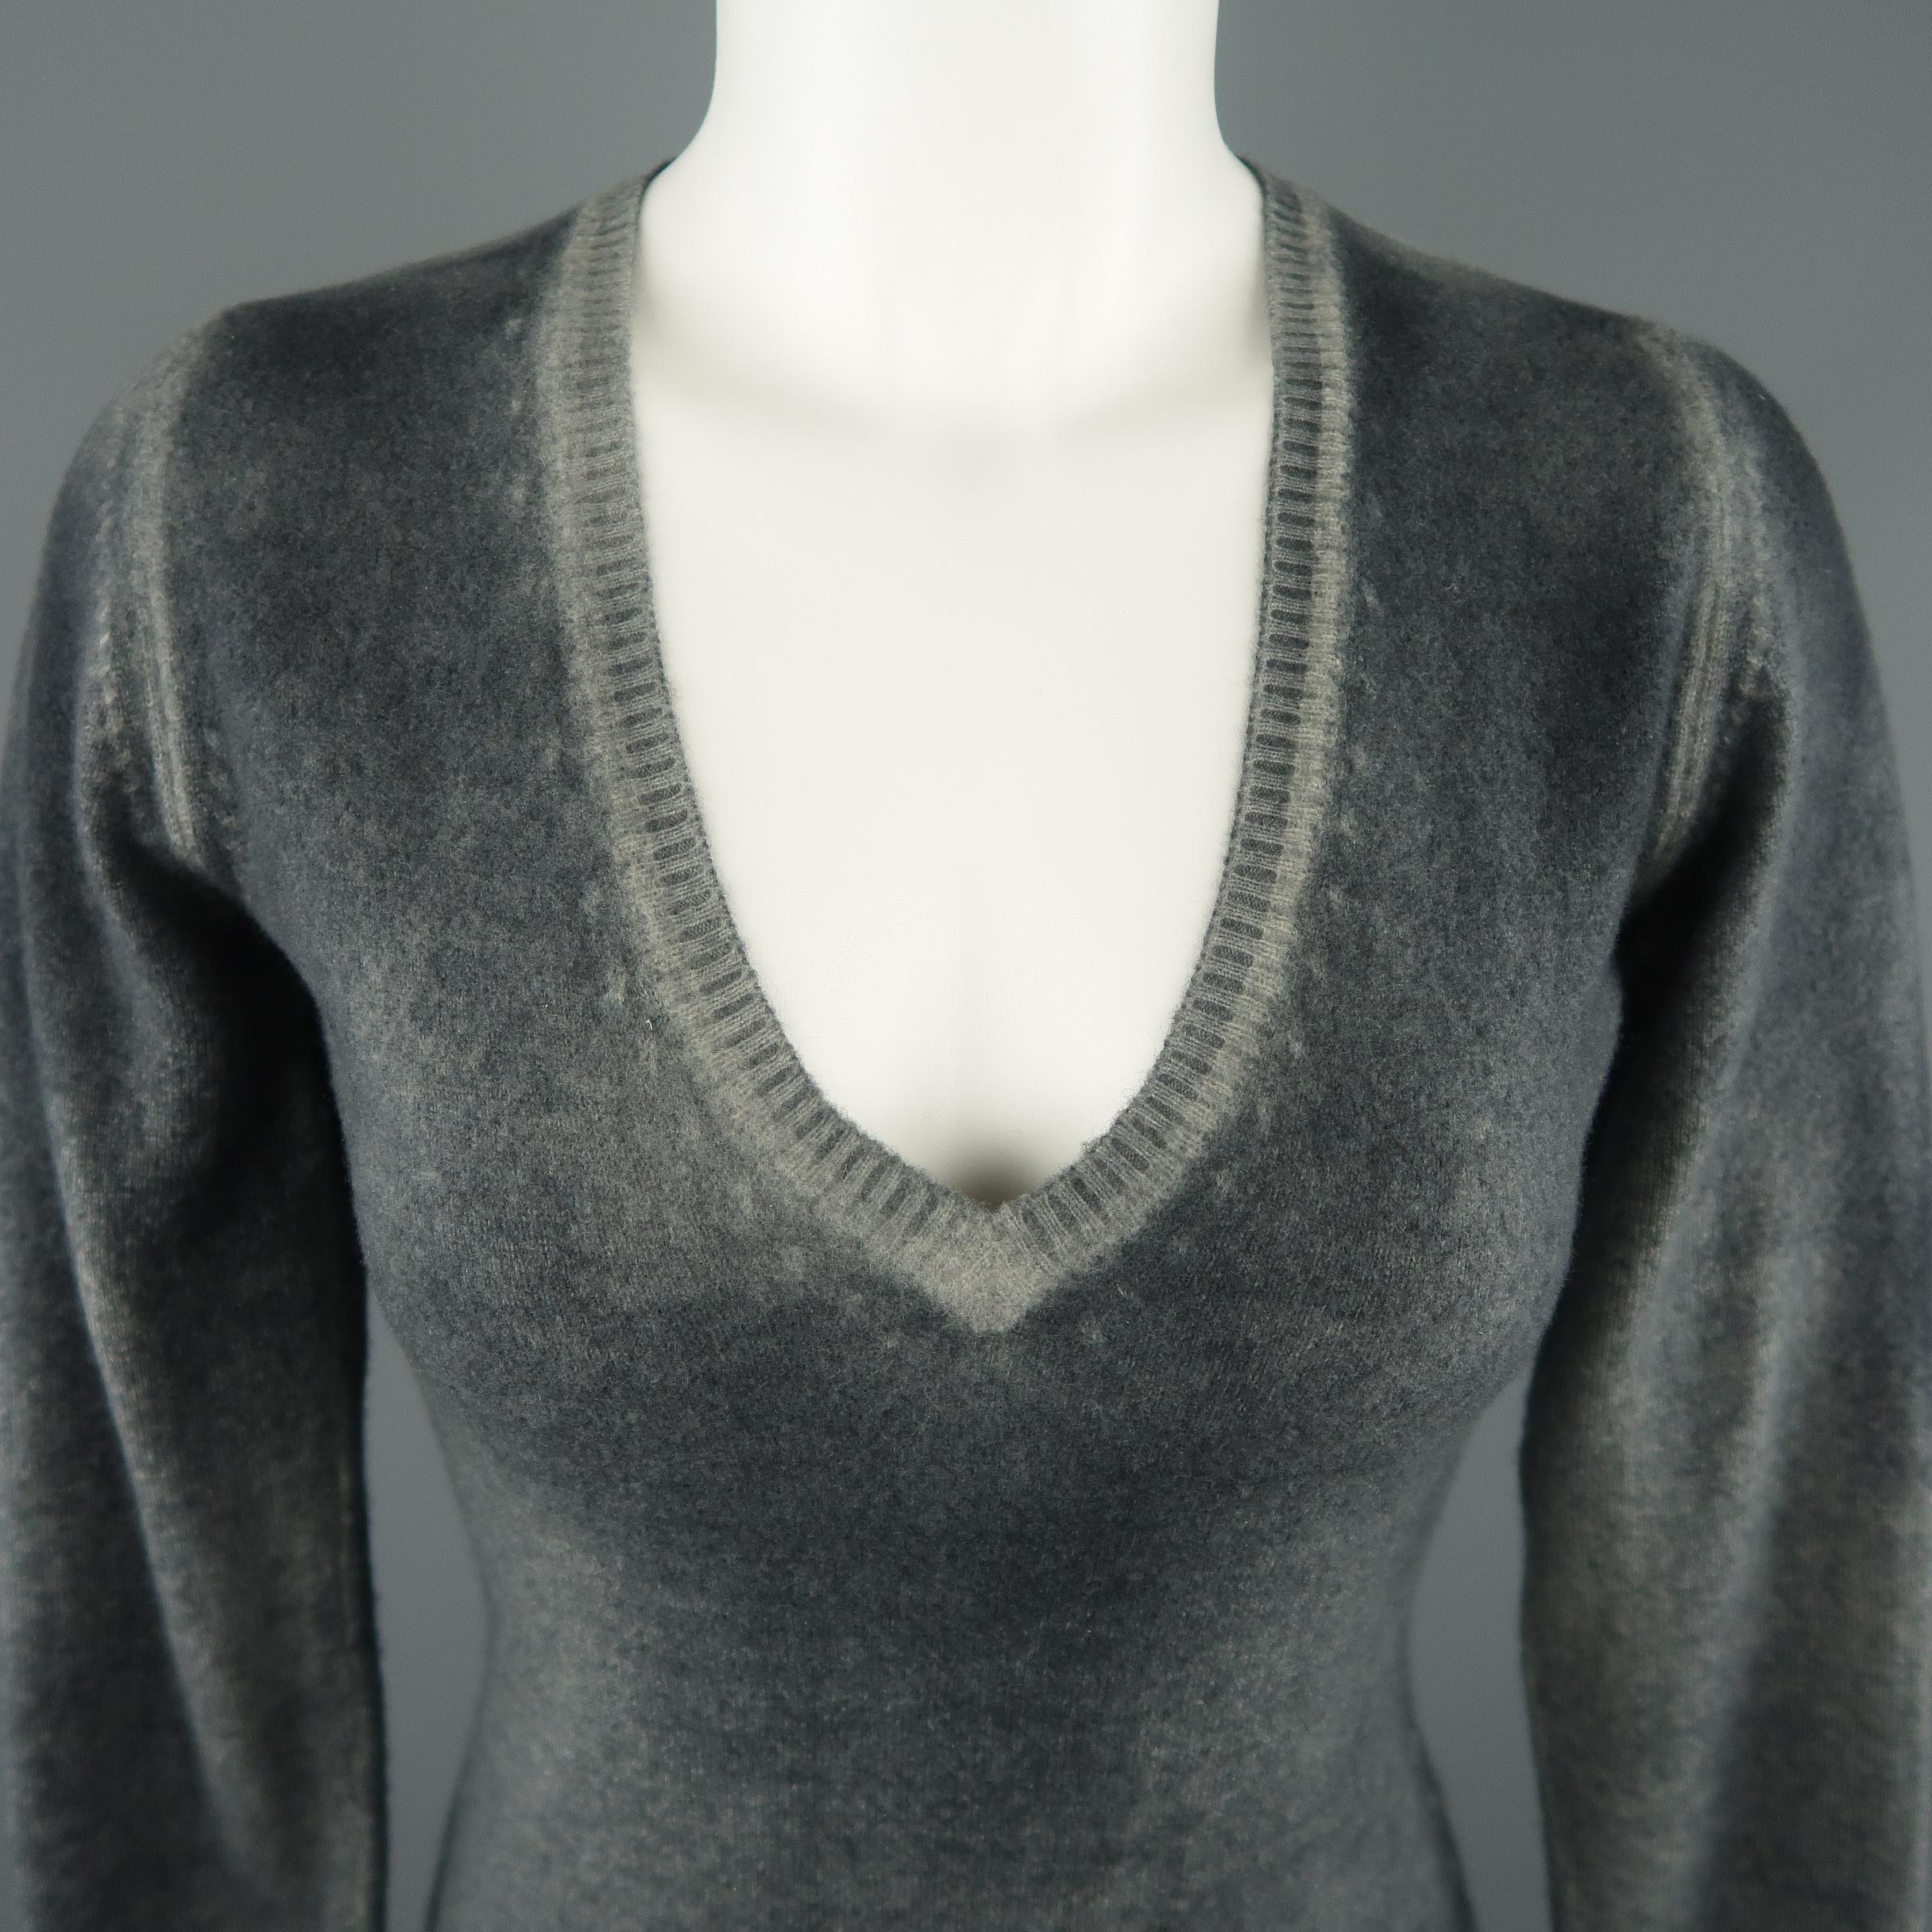 AVANTI pullover sweater comes in gray cashmere knit with a deep v neckline and all over washed effect print. Made in Italy.
 
Excellent Pre-Owned Condition.
Marked: IT 38
 
Measurements:
 
Shoulder: 13 in.
Bust: 34 in.
Sleeve: 23 in.
Length: 24 in.